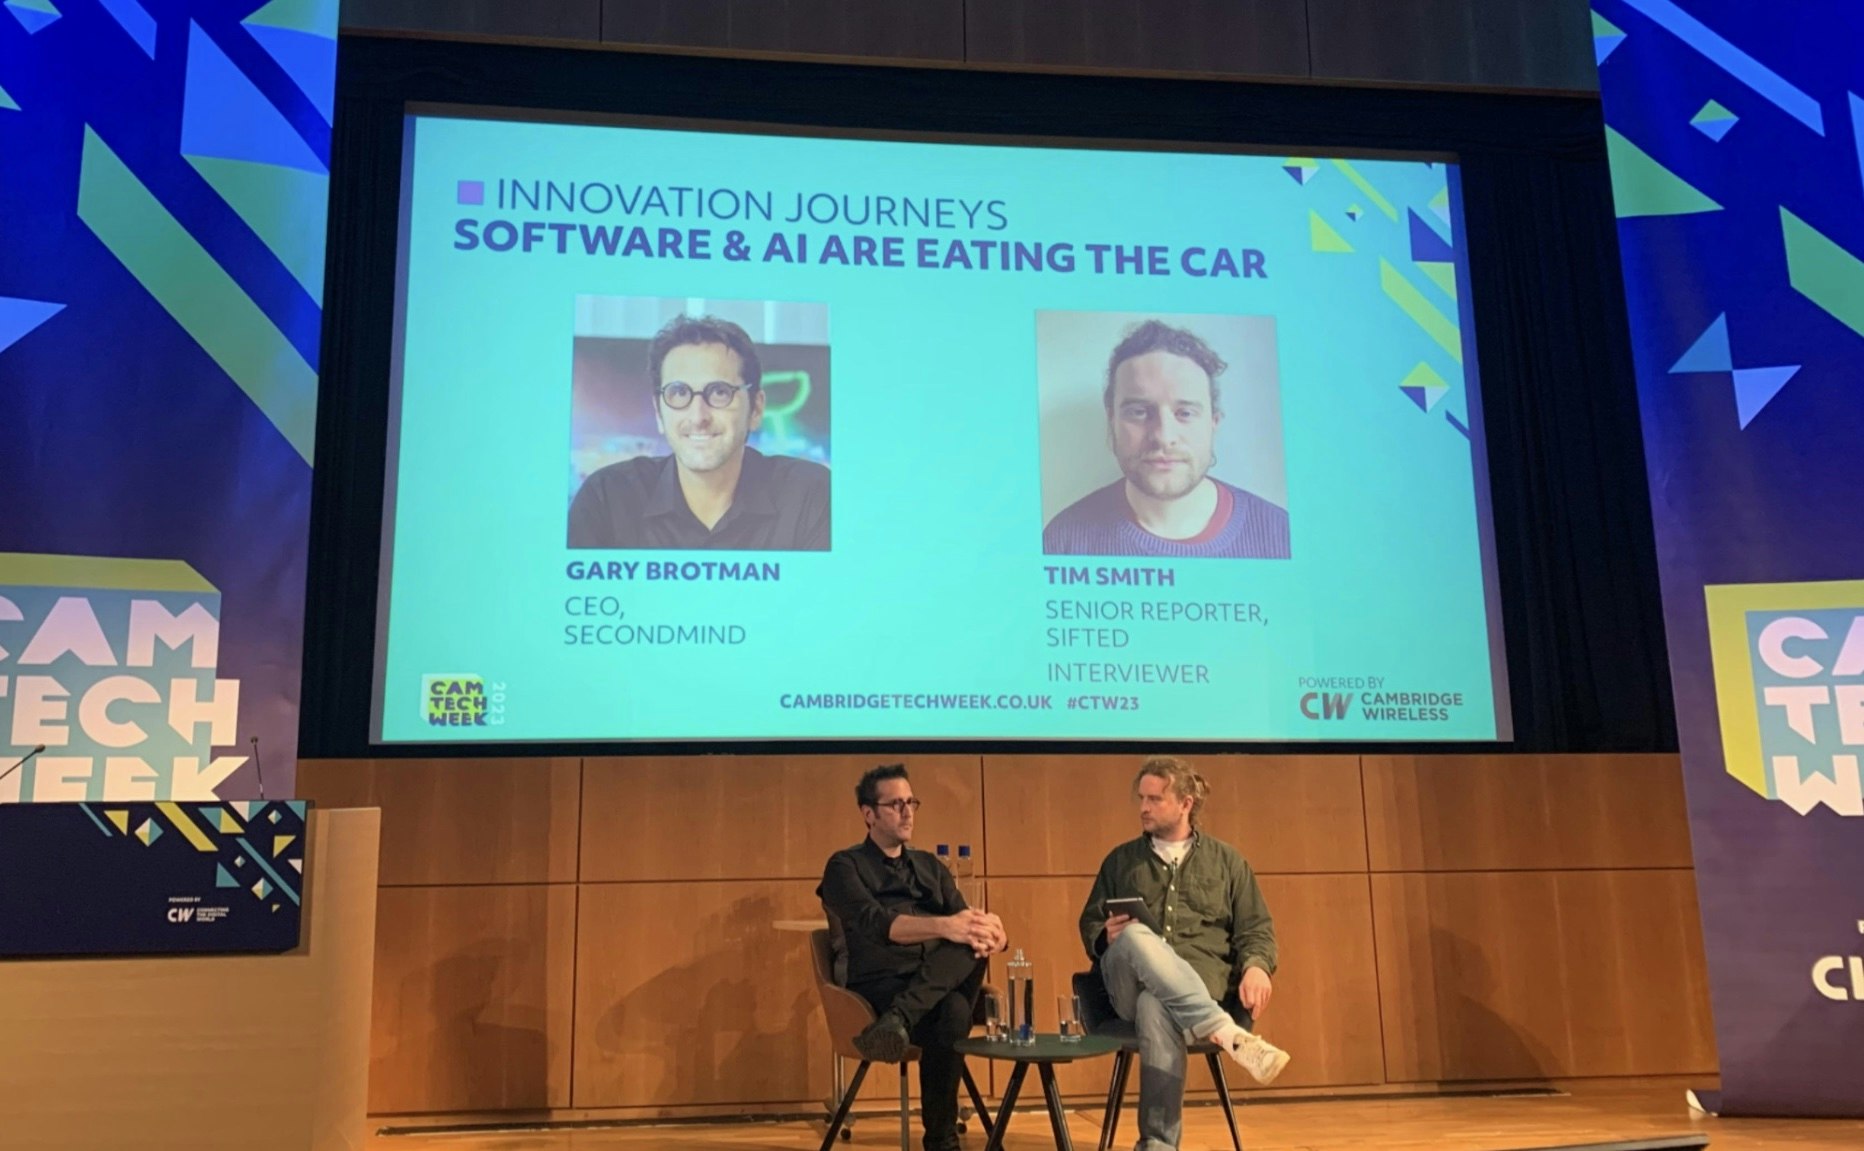 An image of Tim Smith and Gary Brotman on stage at the Cambridge Tech Week